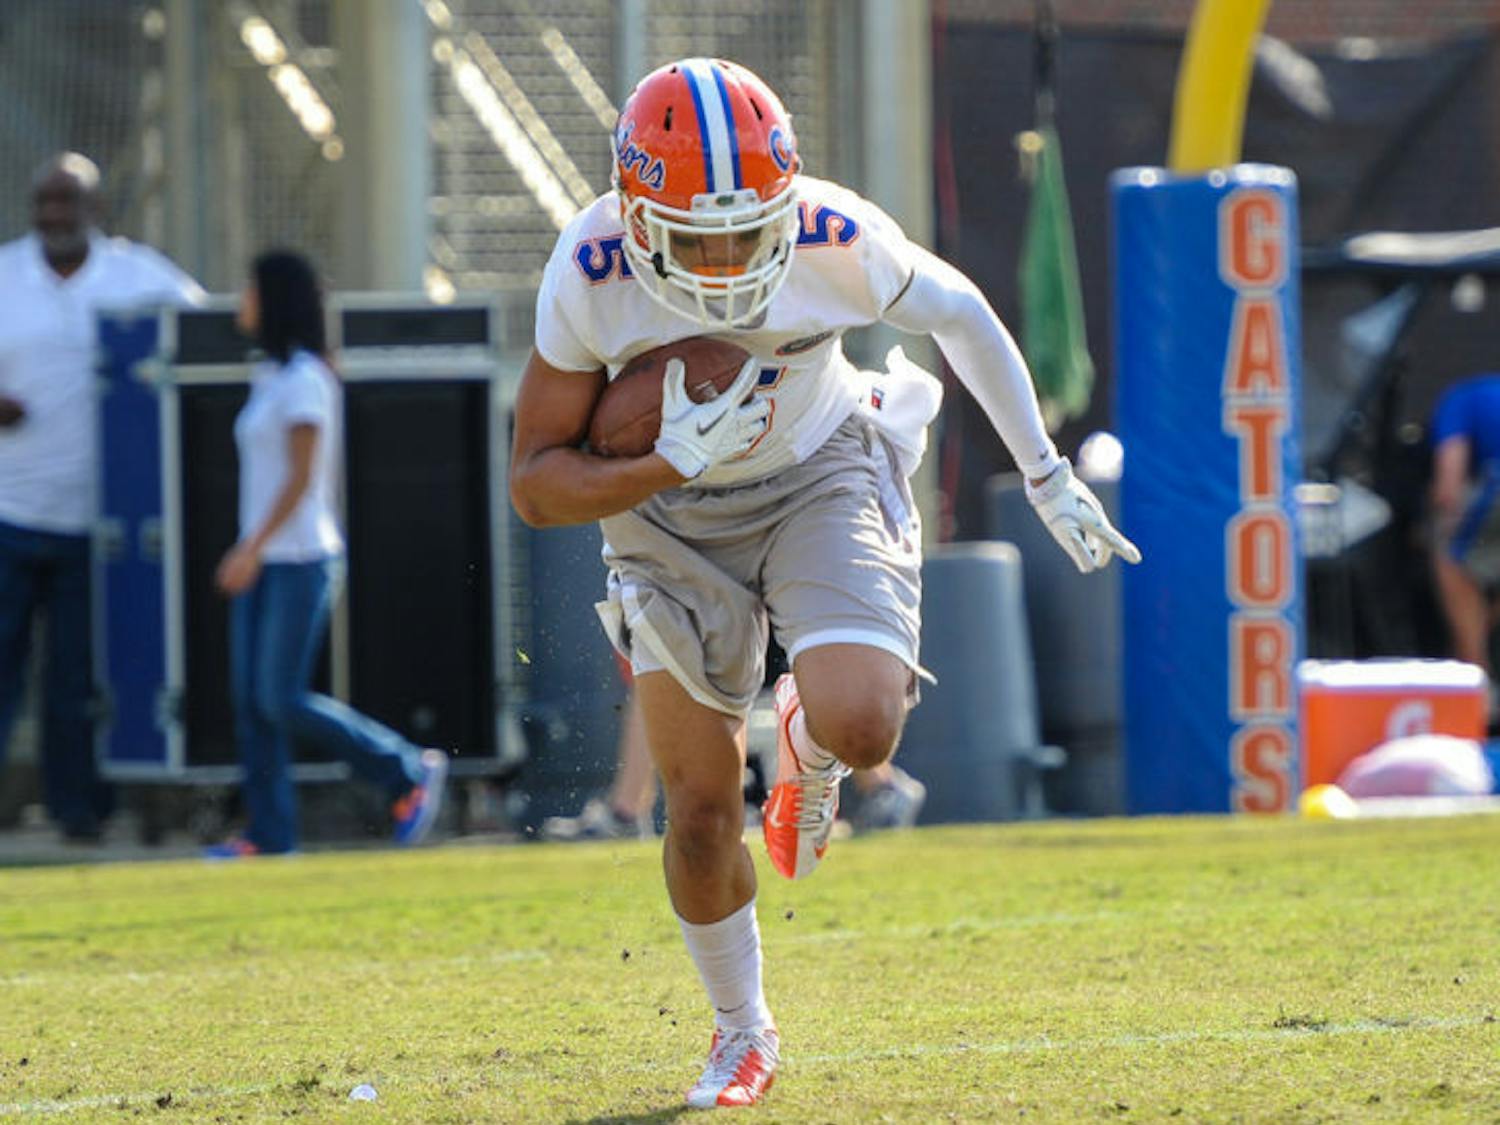 Jalen Tabor carries the ball during Florida’s second open practice on March 21 at Sanders Practice Fields.